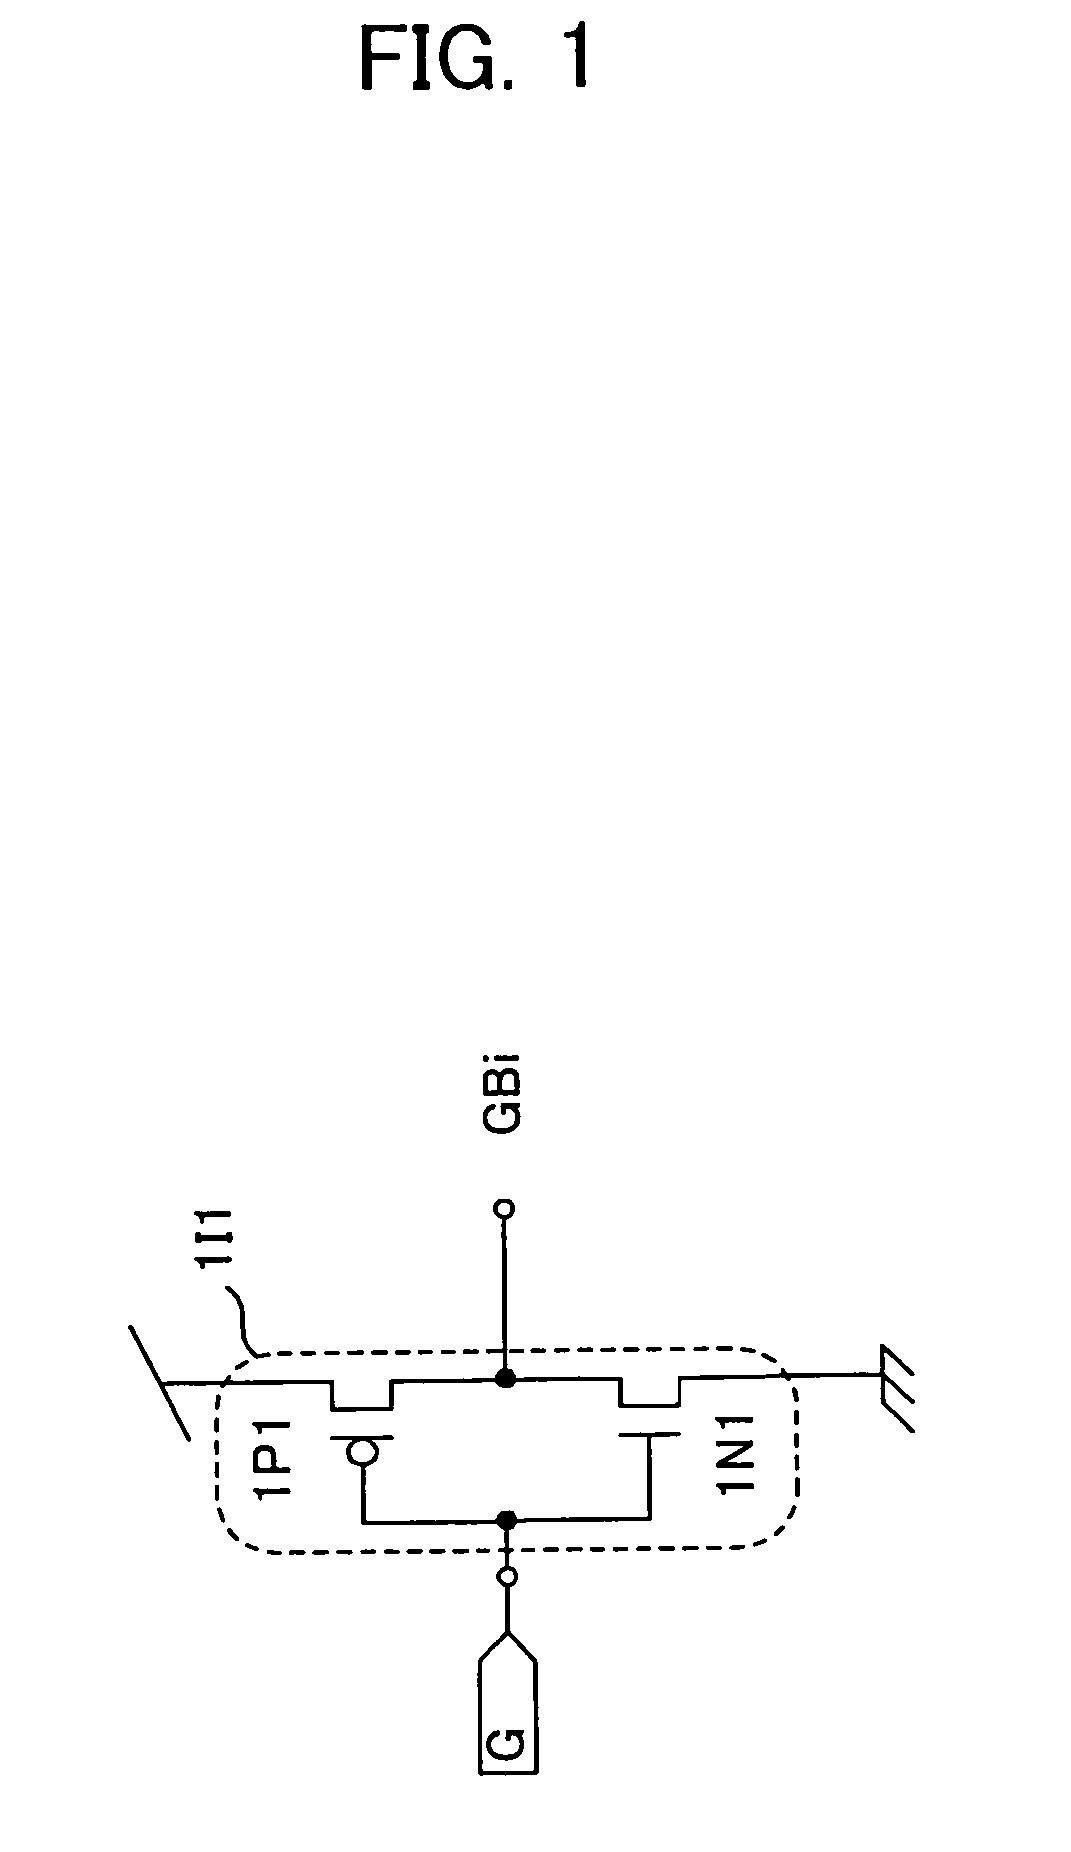 Single-event-effect tolerant SOI-based inverter, NAND element, NOR element, semiconductor memory device and data latch circuit